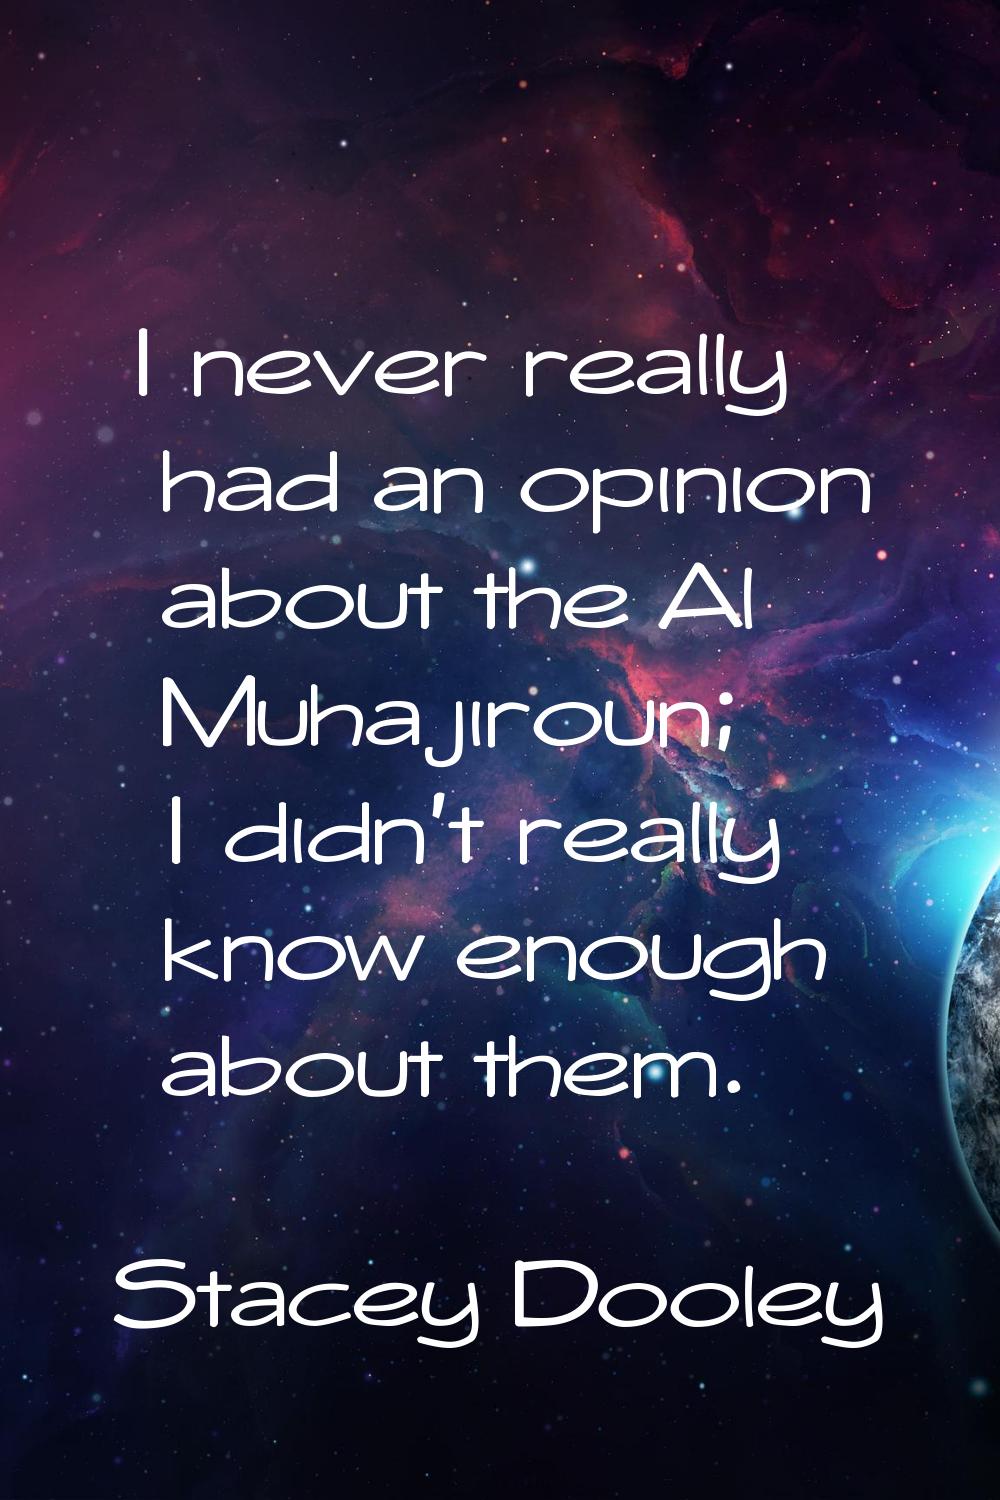 I never really had an opinion about the Al Muhajiroun; I didn't really know enough about them.